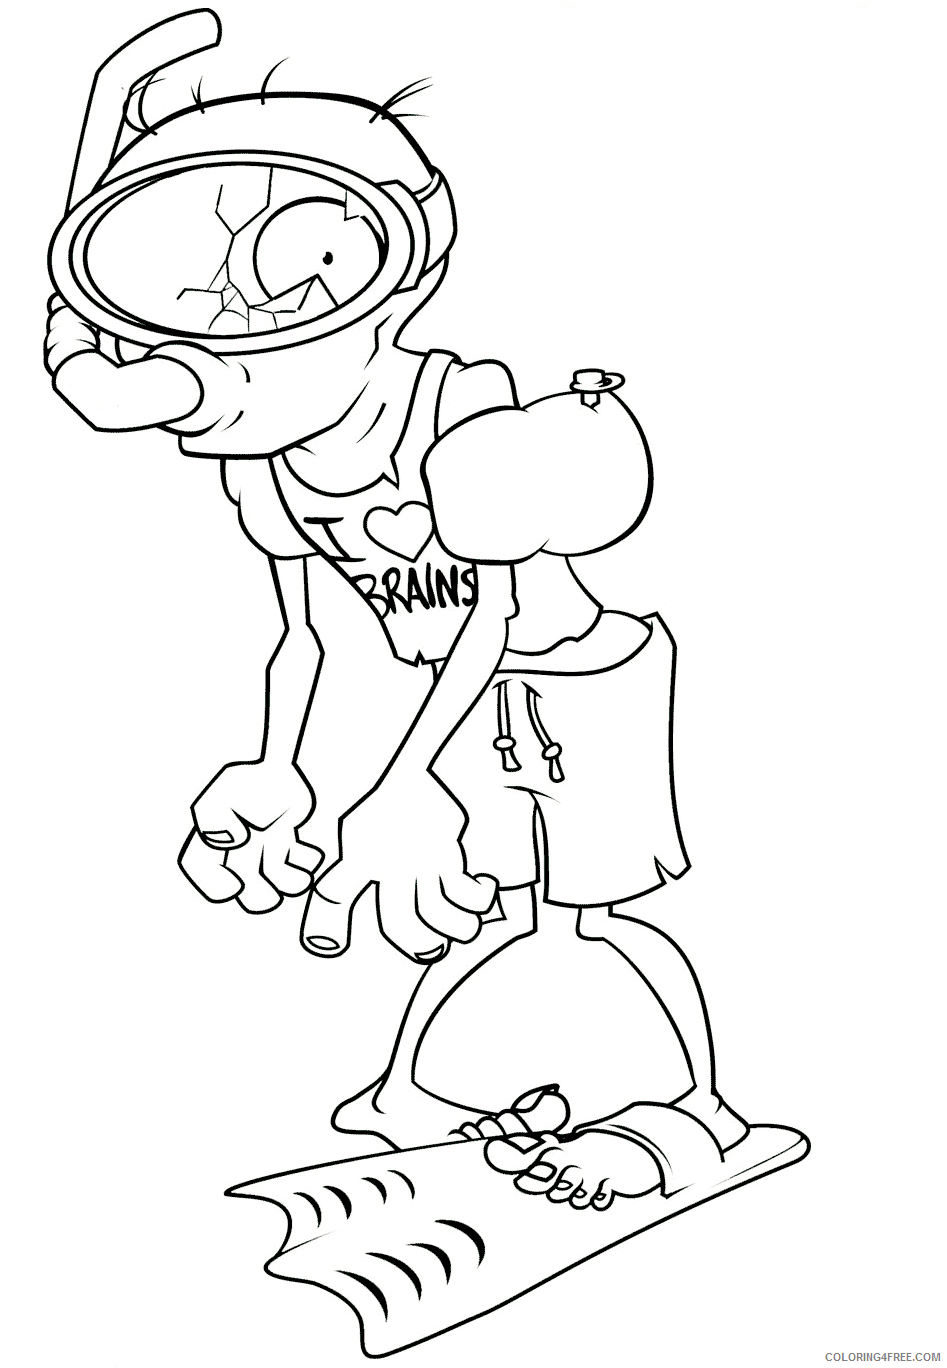 Plants vs Zombies Coloring Pages Games scuba zombie Printable 2021 0808 Coloring4free